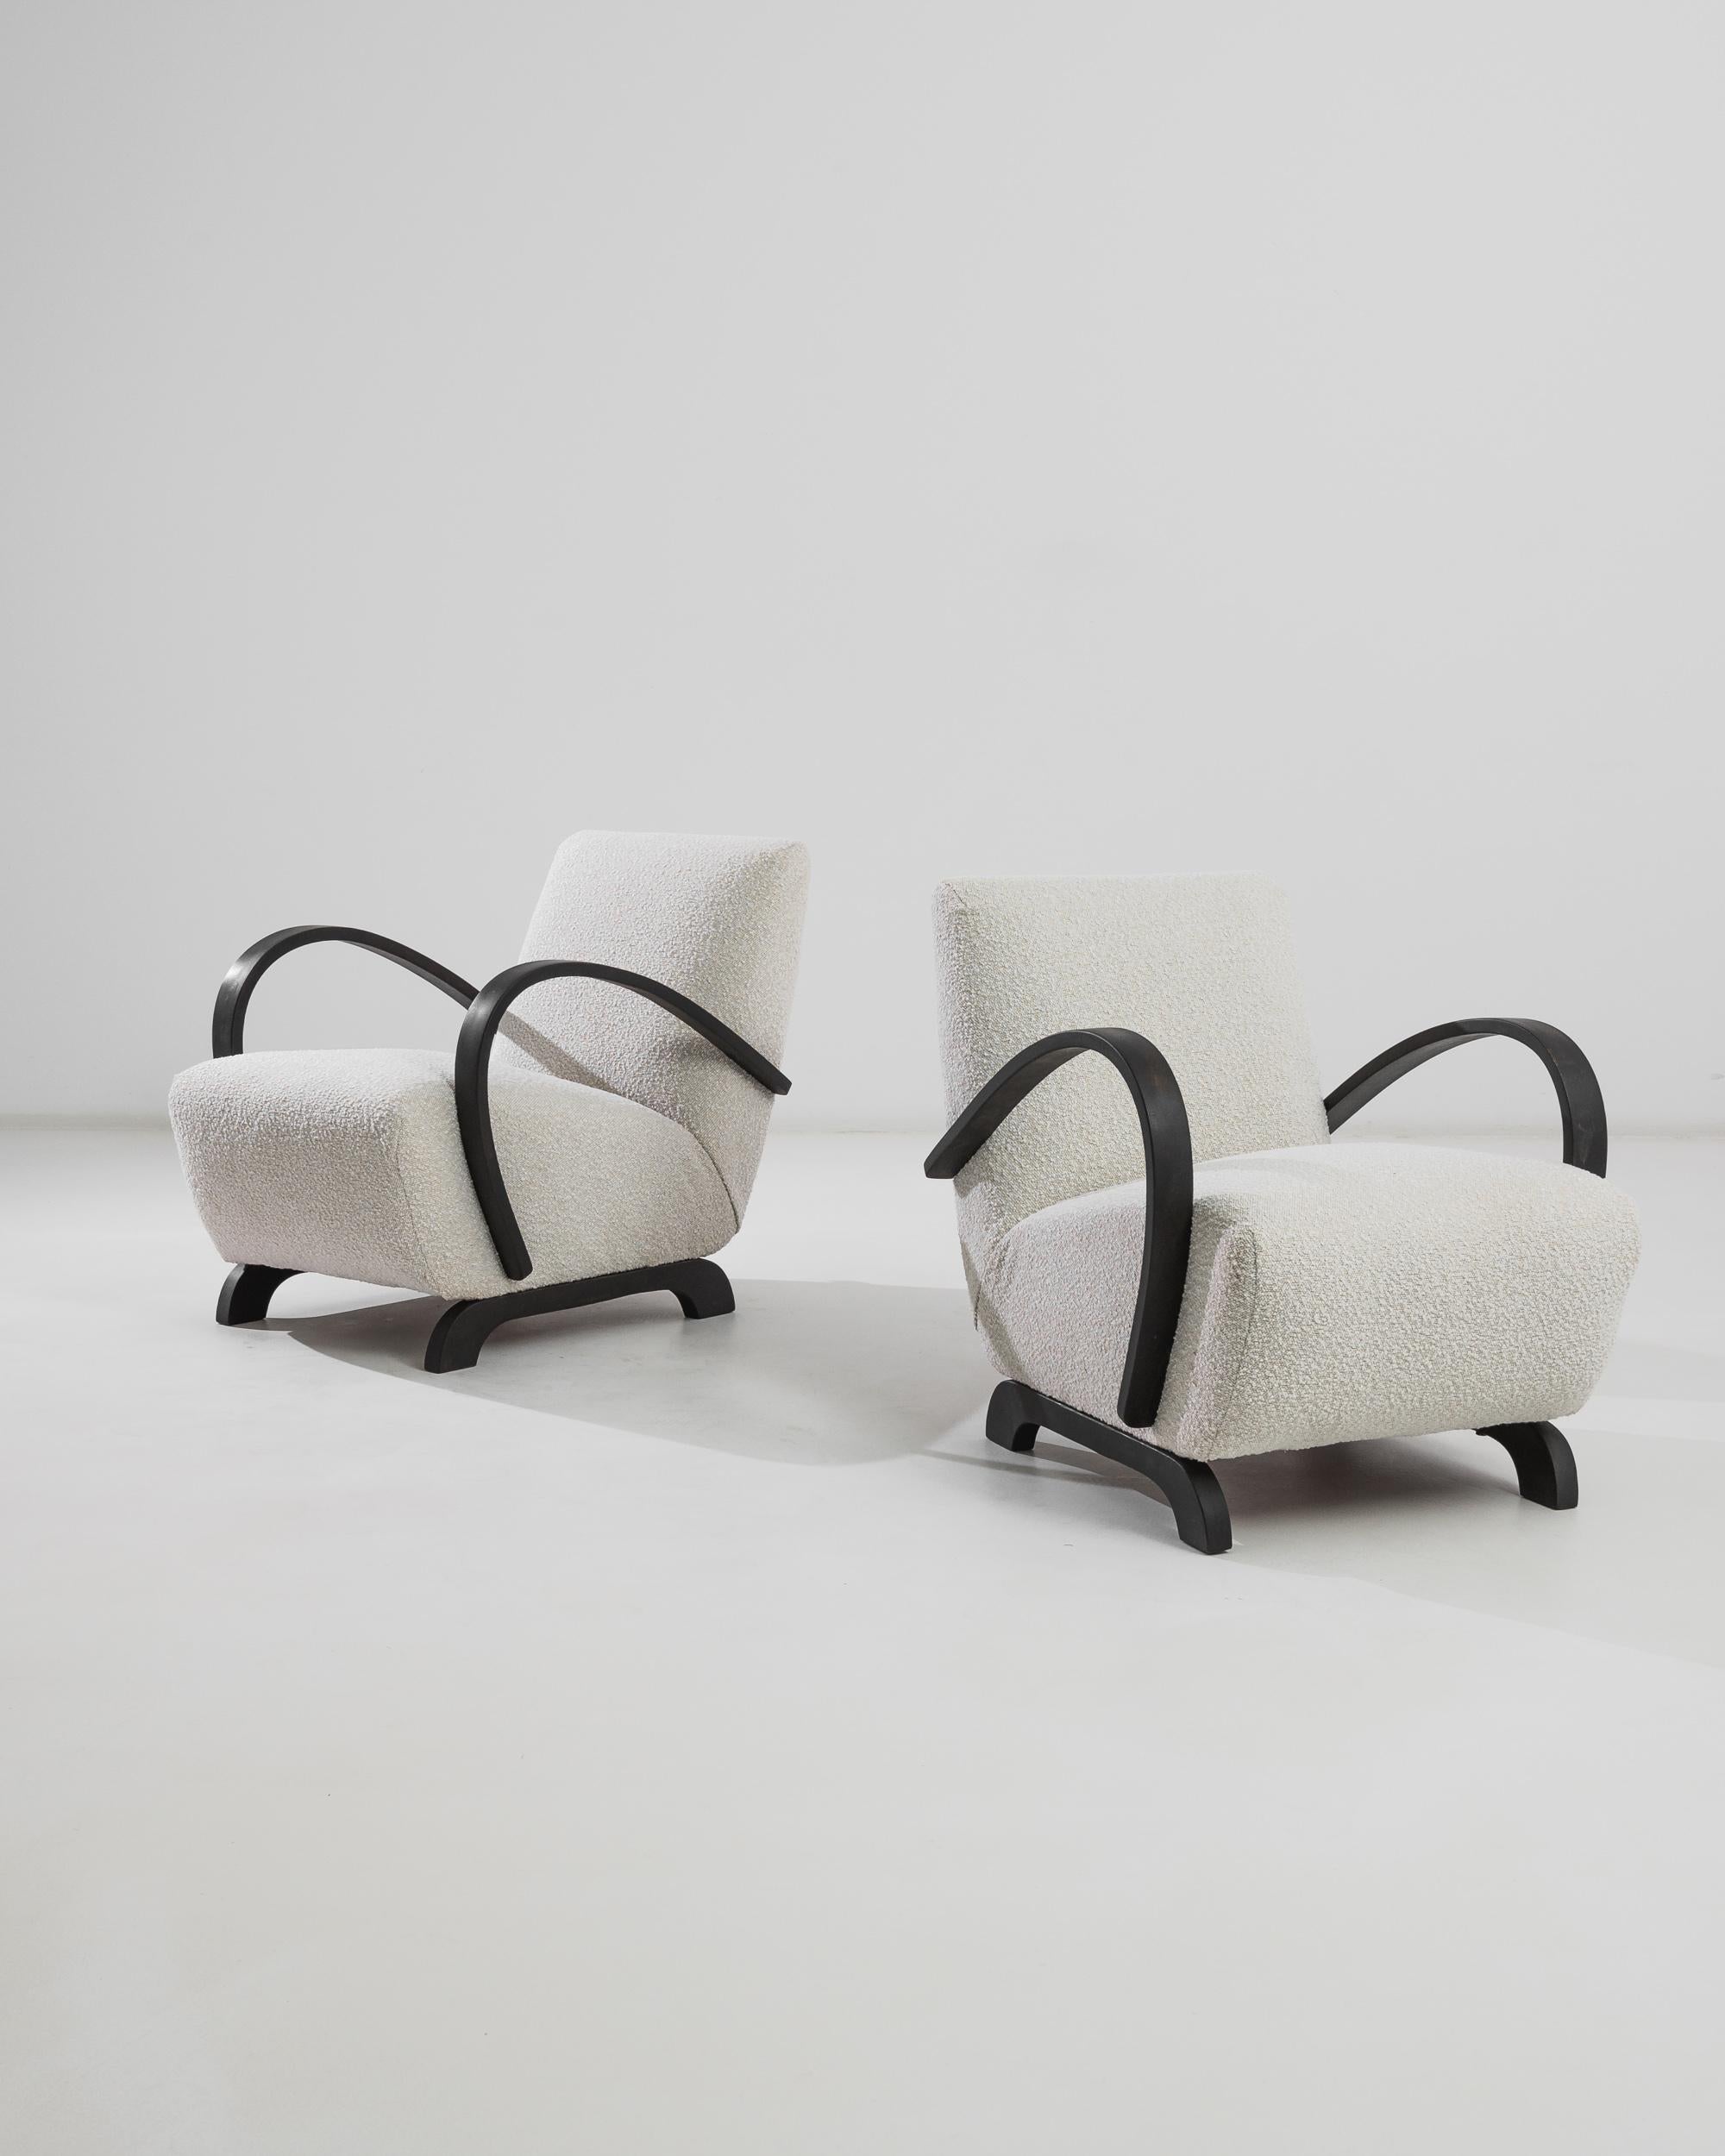 Classic black bentwood combines with reupholstered white bouclé in this iconic design by J. Halabala. Manufactured in Czechia circa 1950, these mid-century modern pieces flaunt a striking play of contrasts in colors, textures and shapes. While black